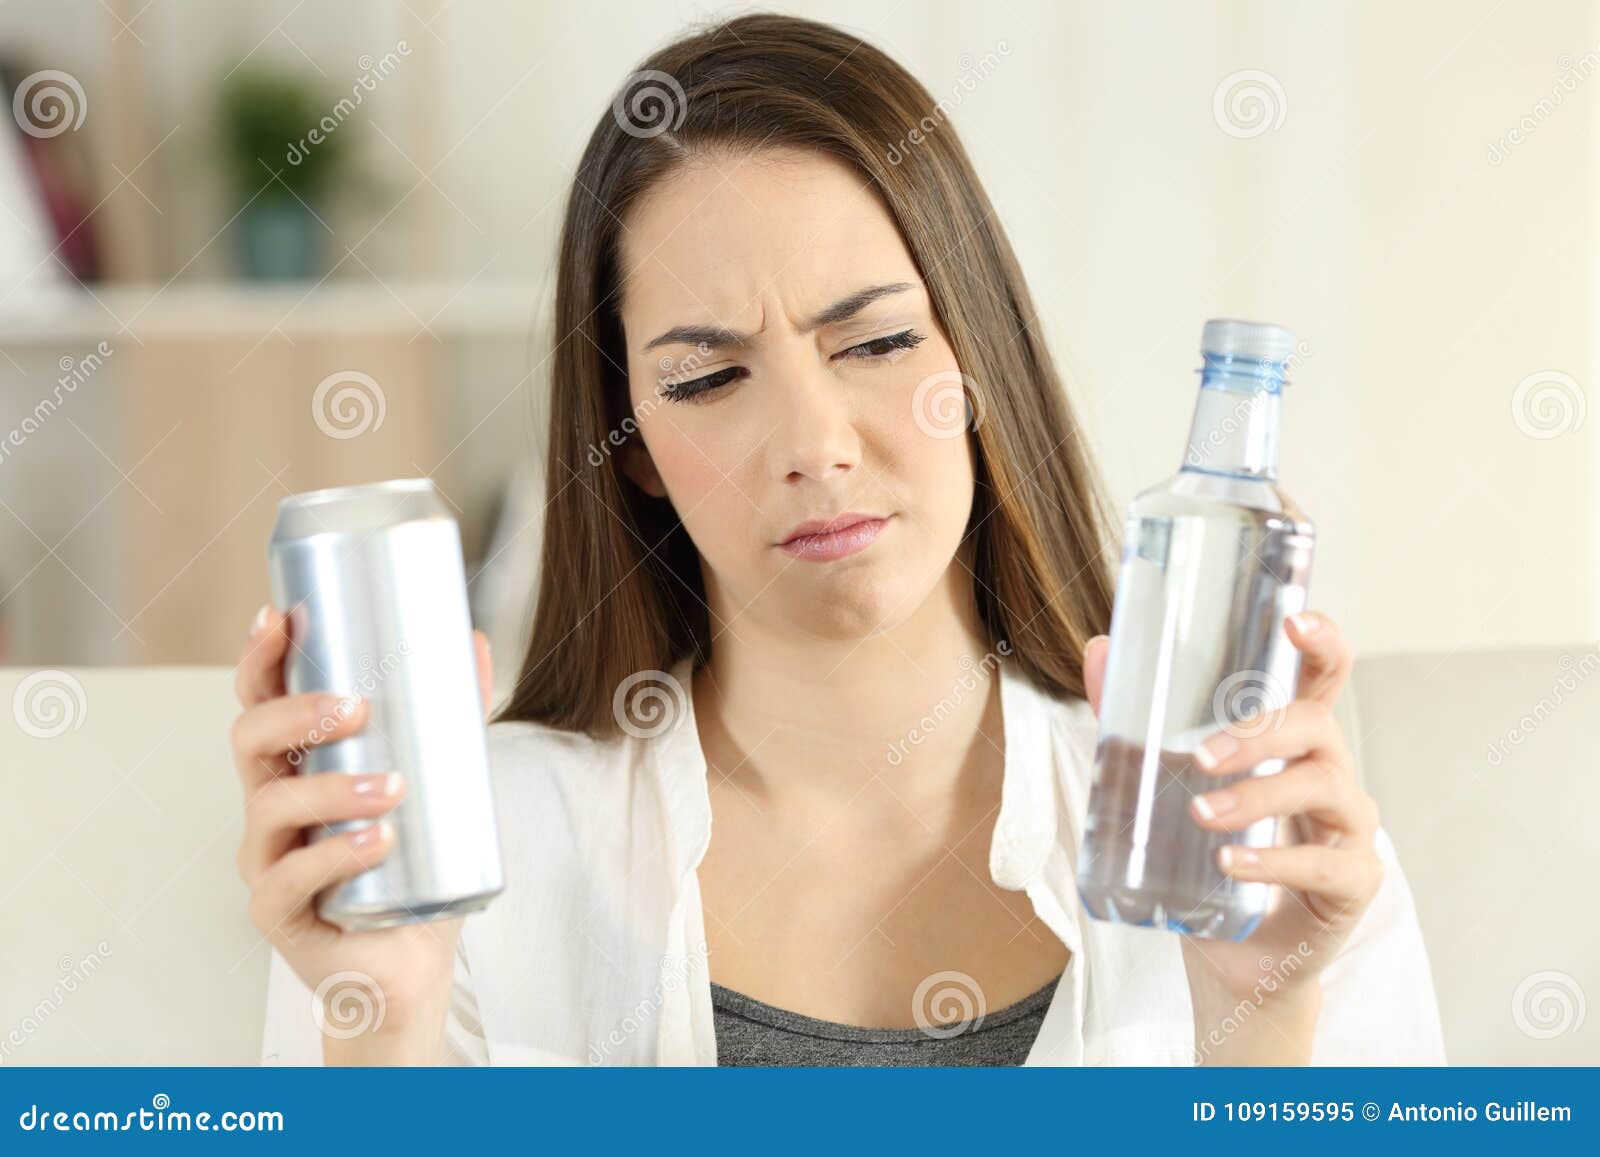 woman doubting between soda drink and water